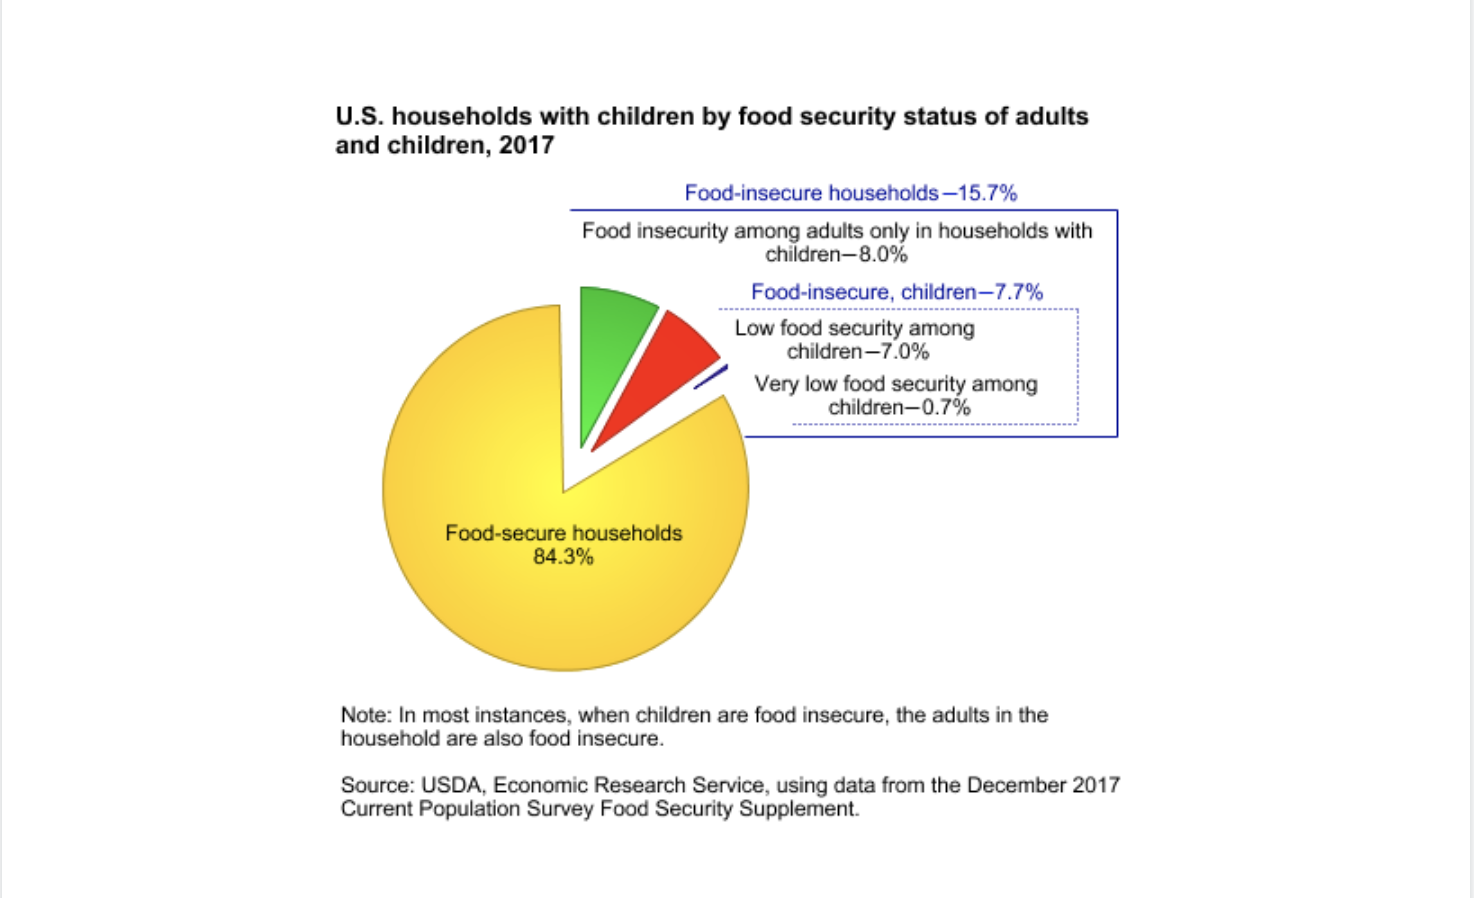 effects of food insecurity